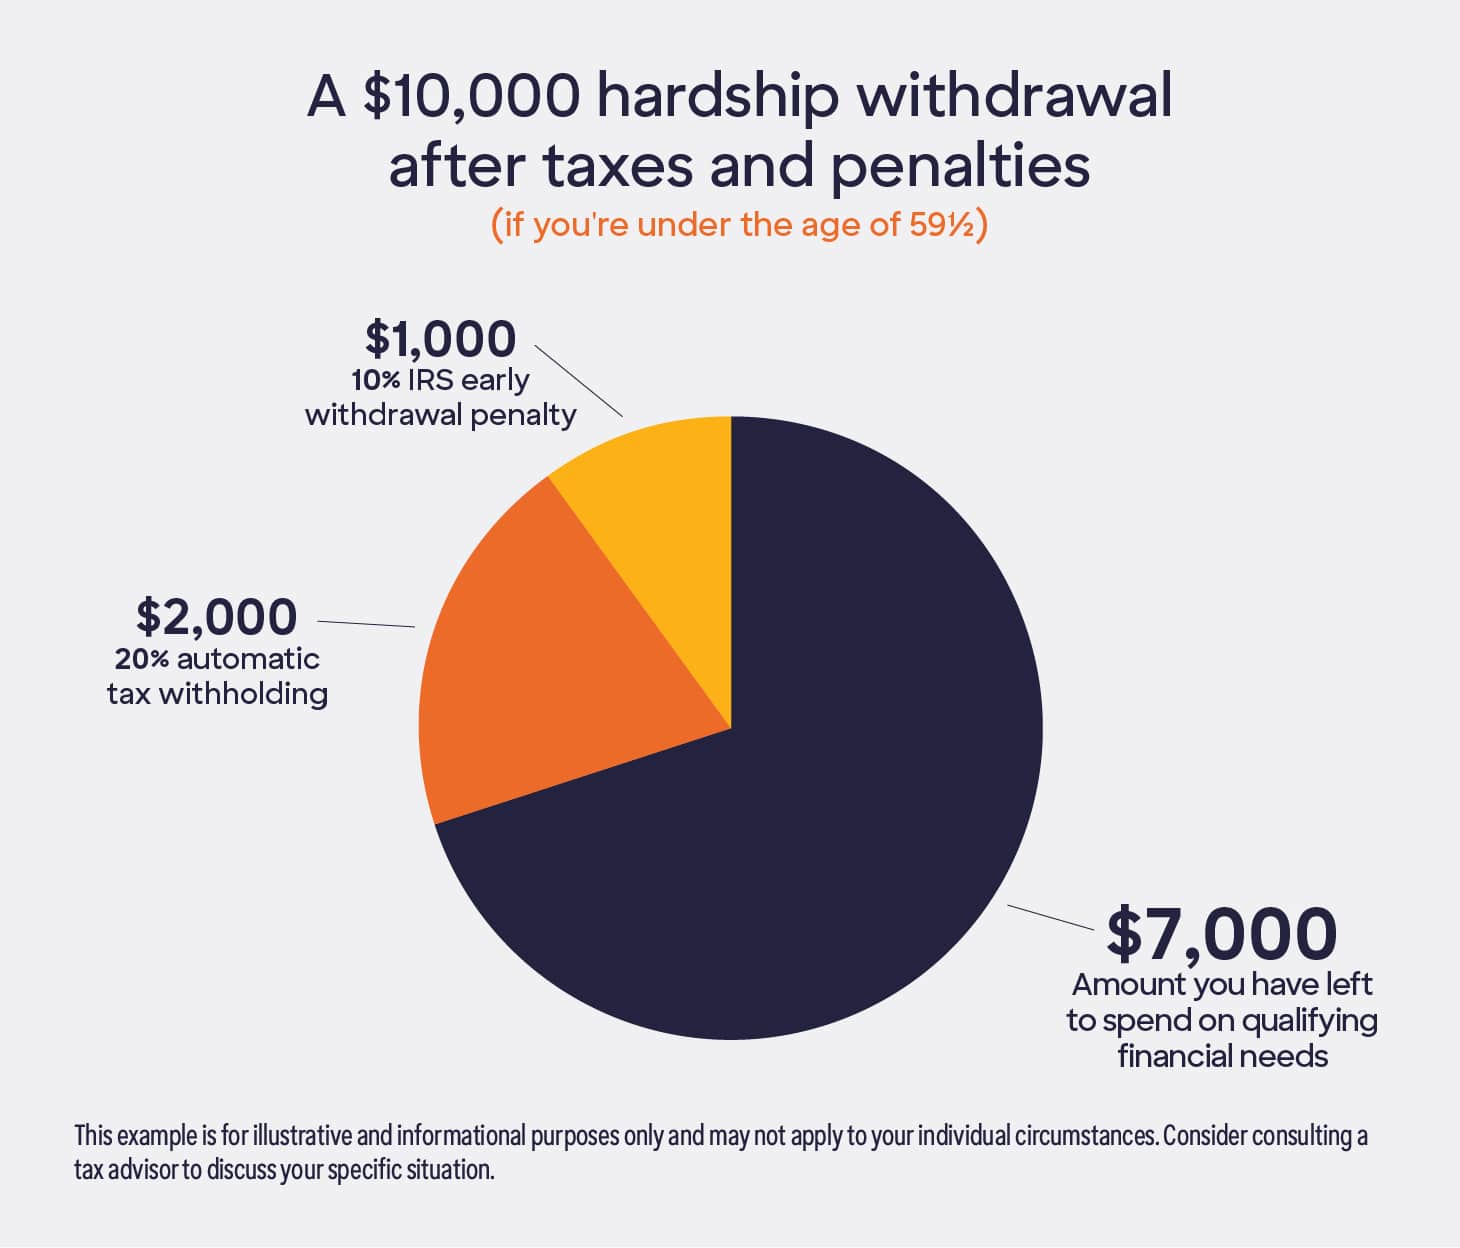 When considering a 401(k) hardship withdrawal, keep in mind that you’ll incur taxes and penalties.